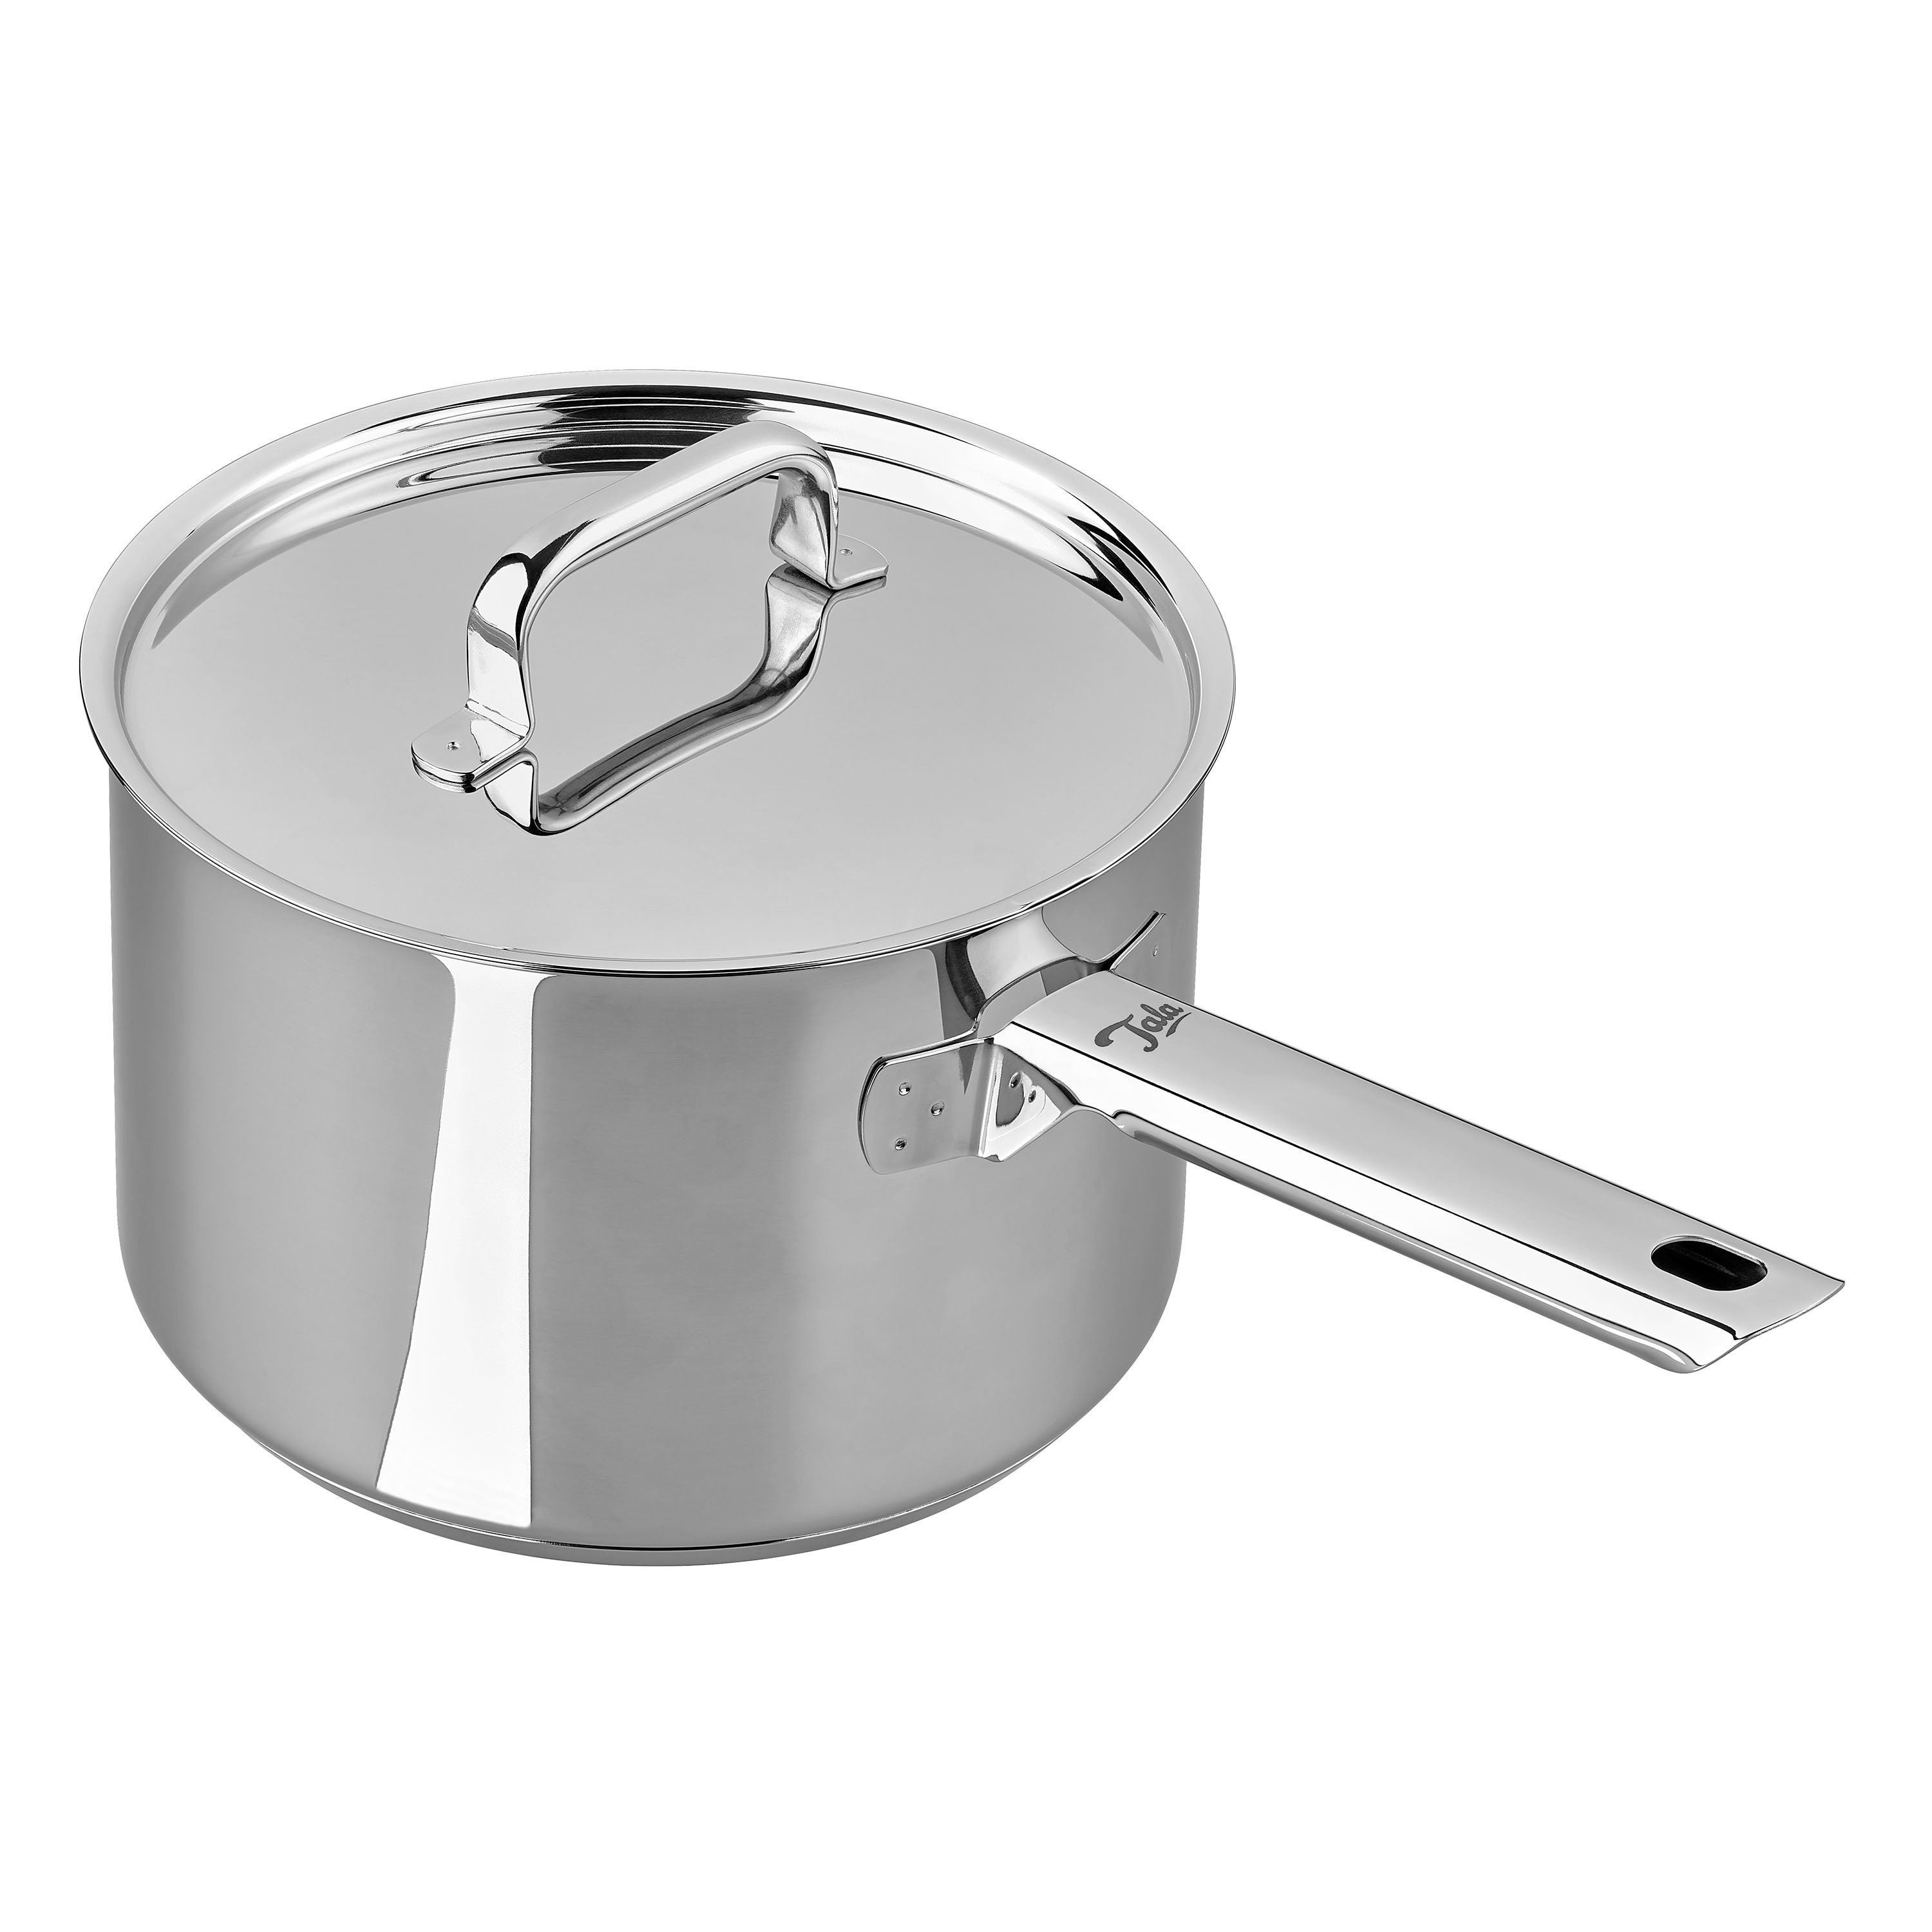 Tala Performance Superior Stainless Steel Deep Saucepan with Lid, 18cm